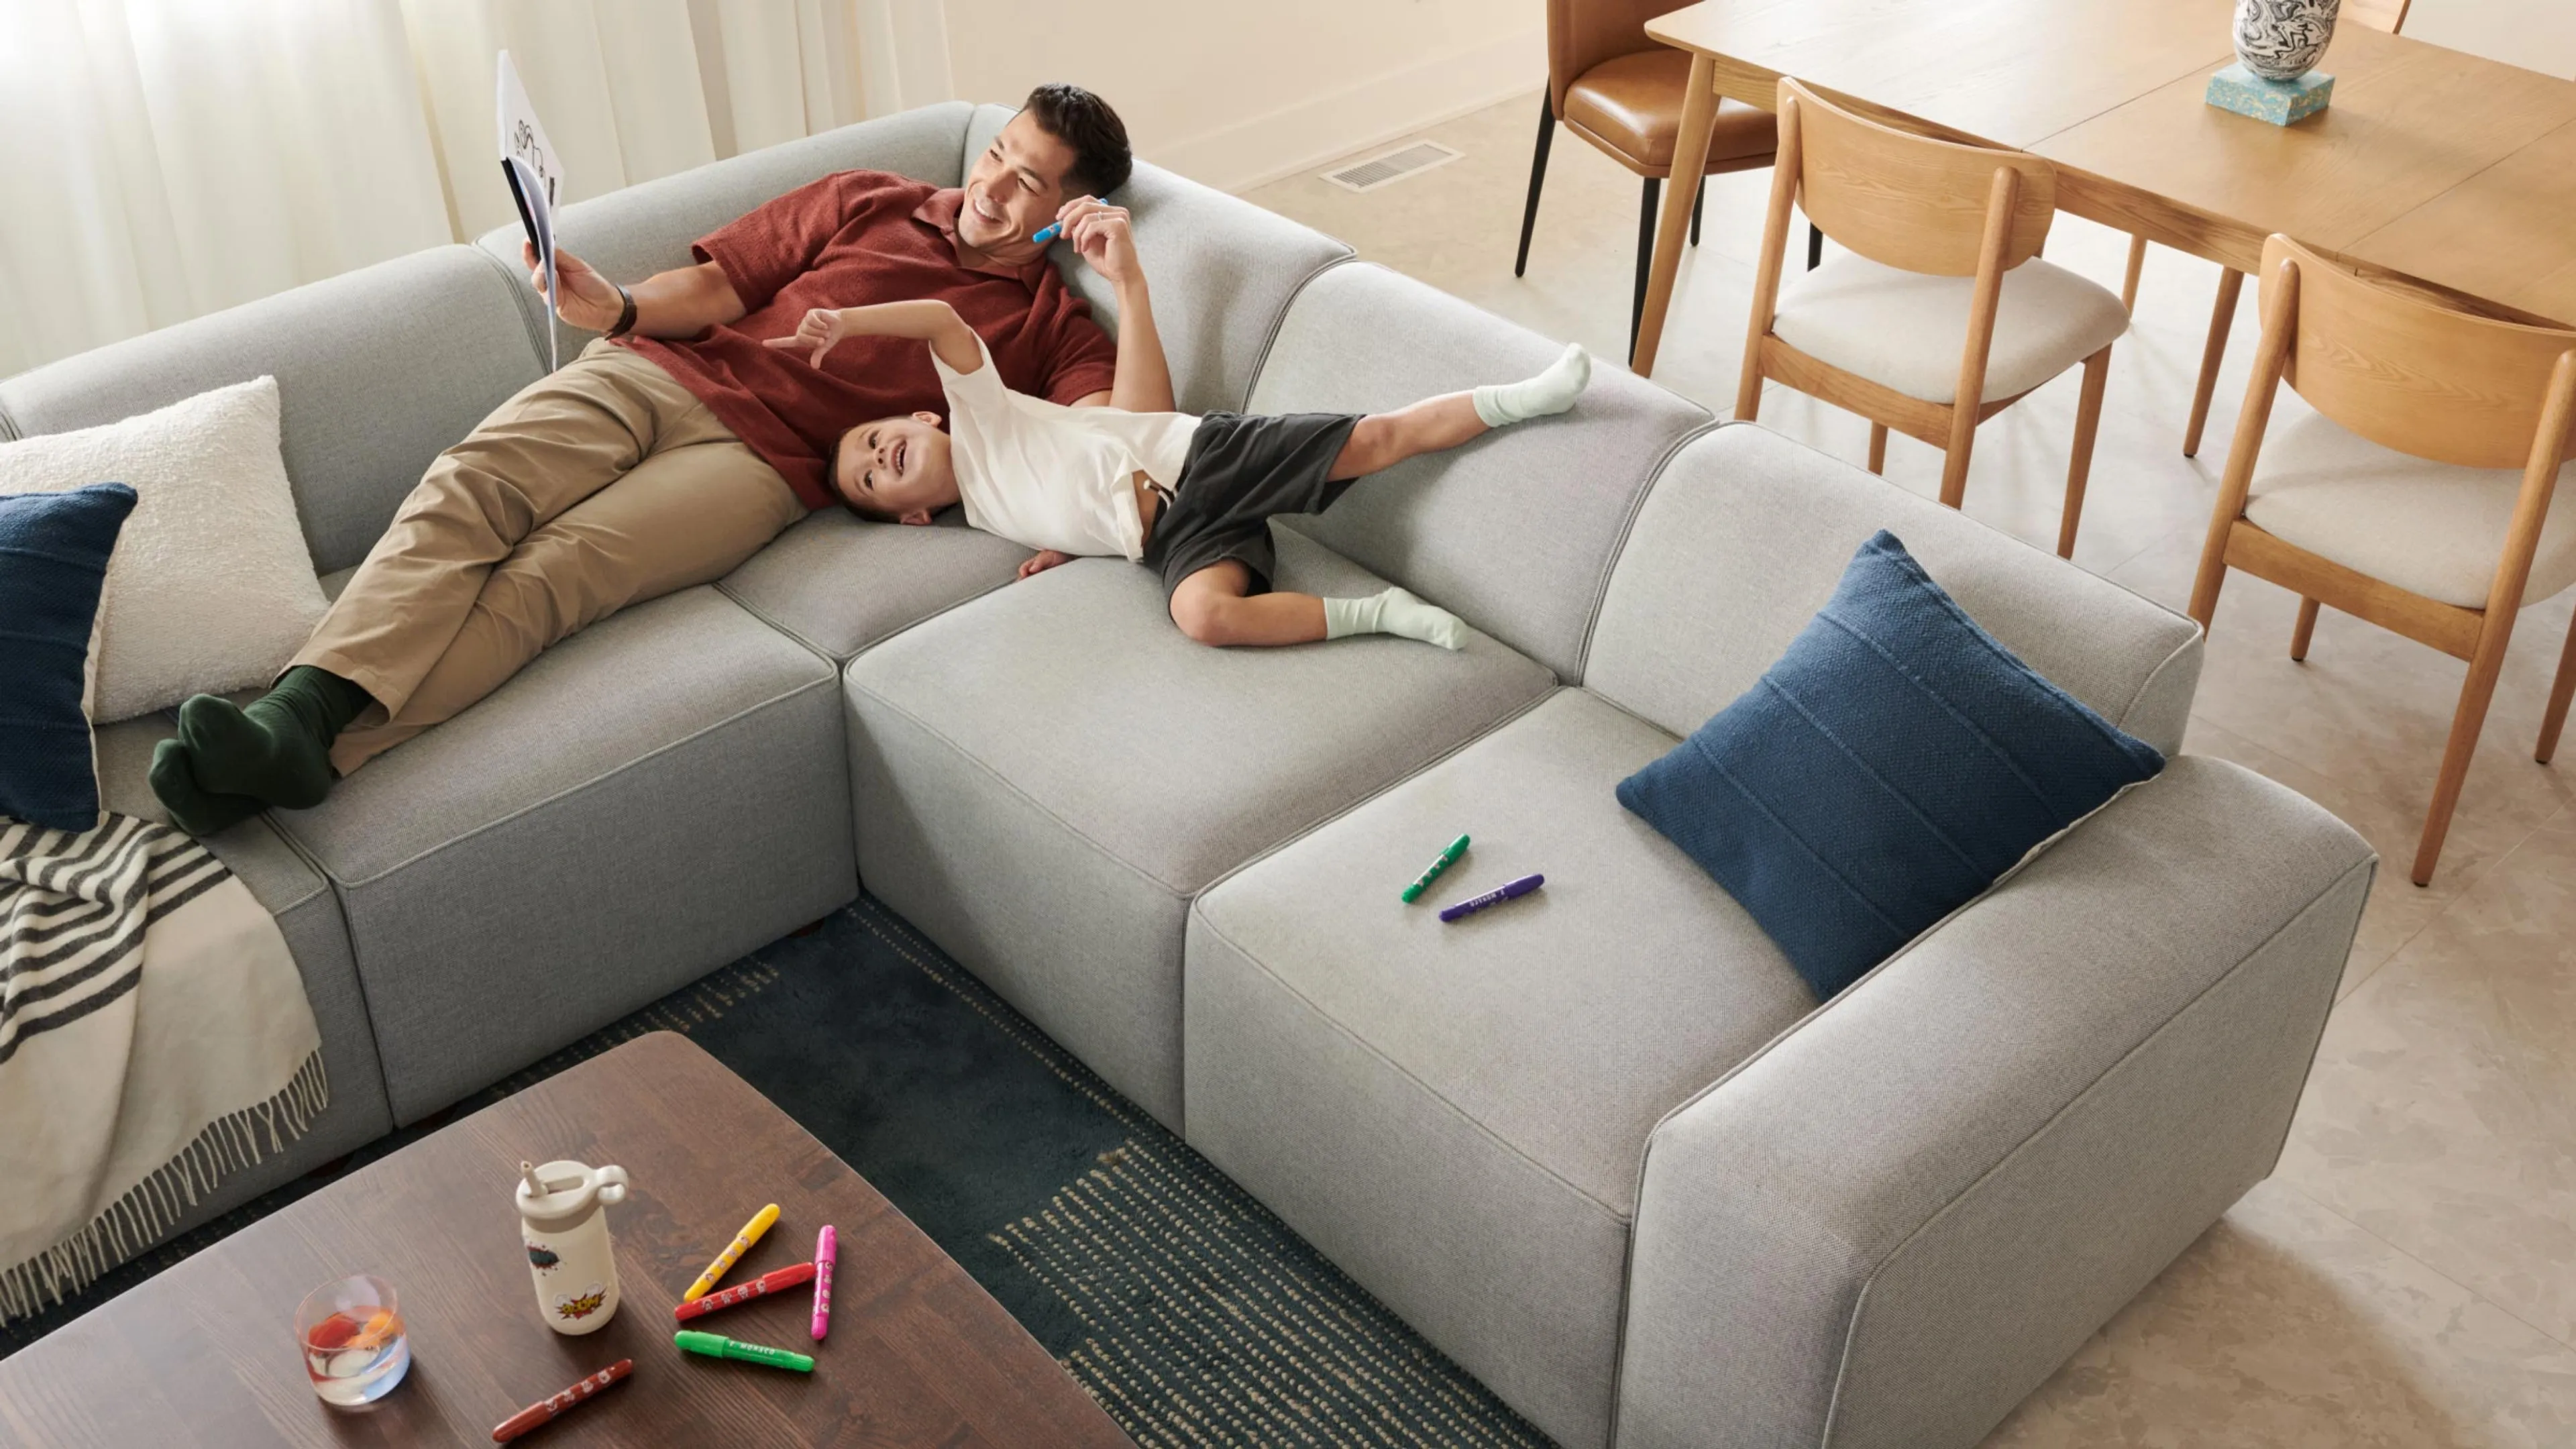 Mambo 4-Piece Sectional